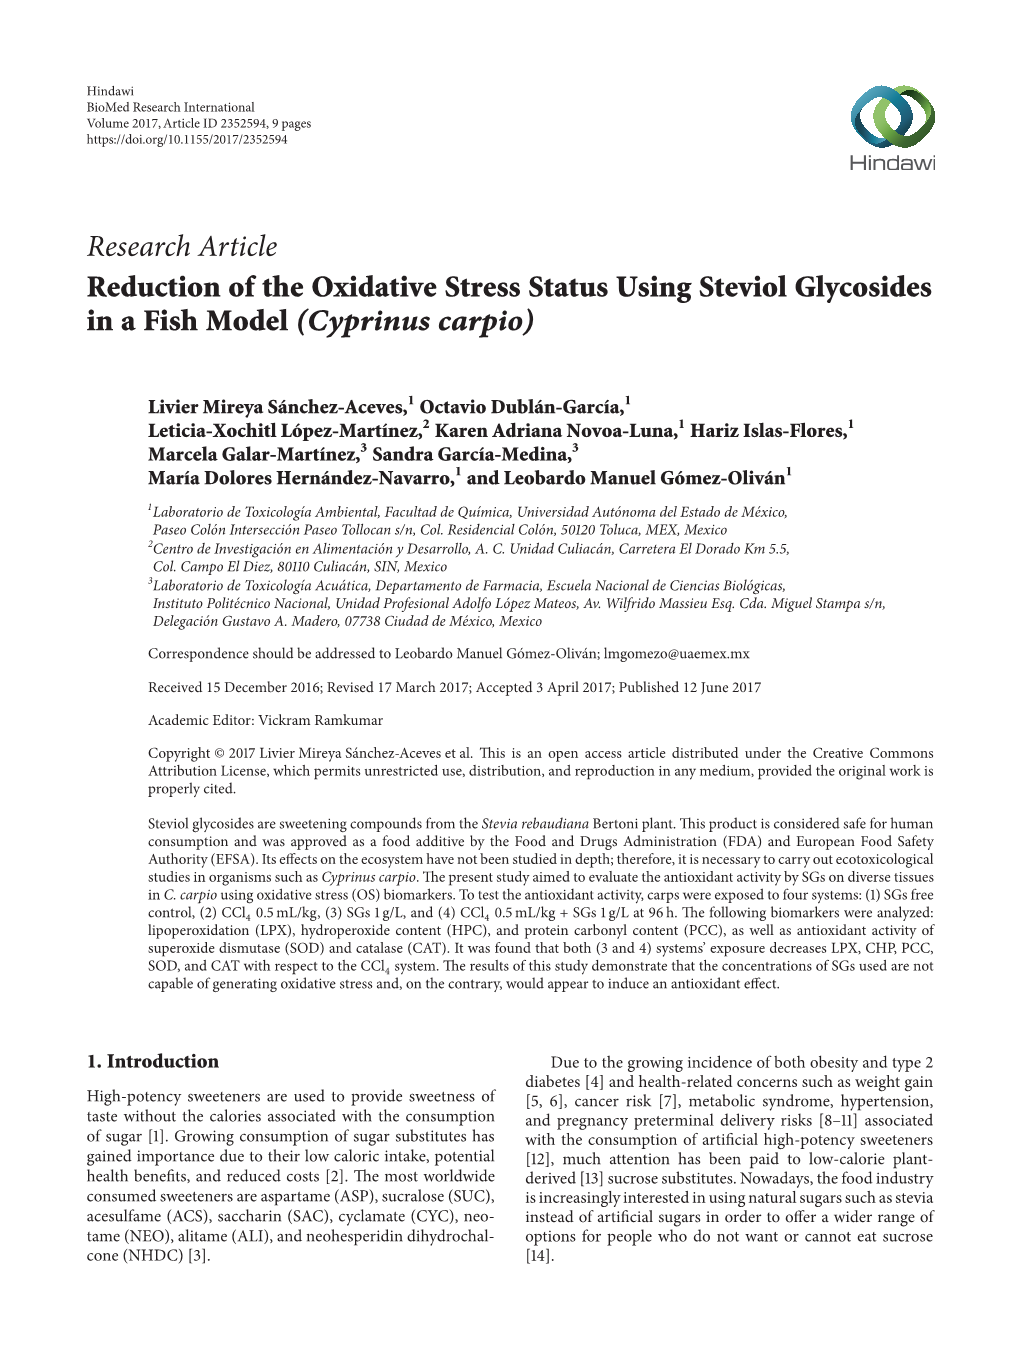 Reduction of the Oxidative Stress Status Using Steviol Glycosides in a Fish Model (Cyprinus Carpio)